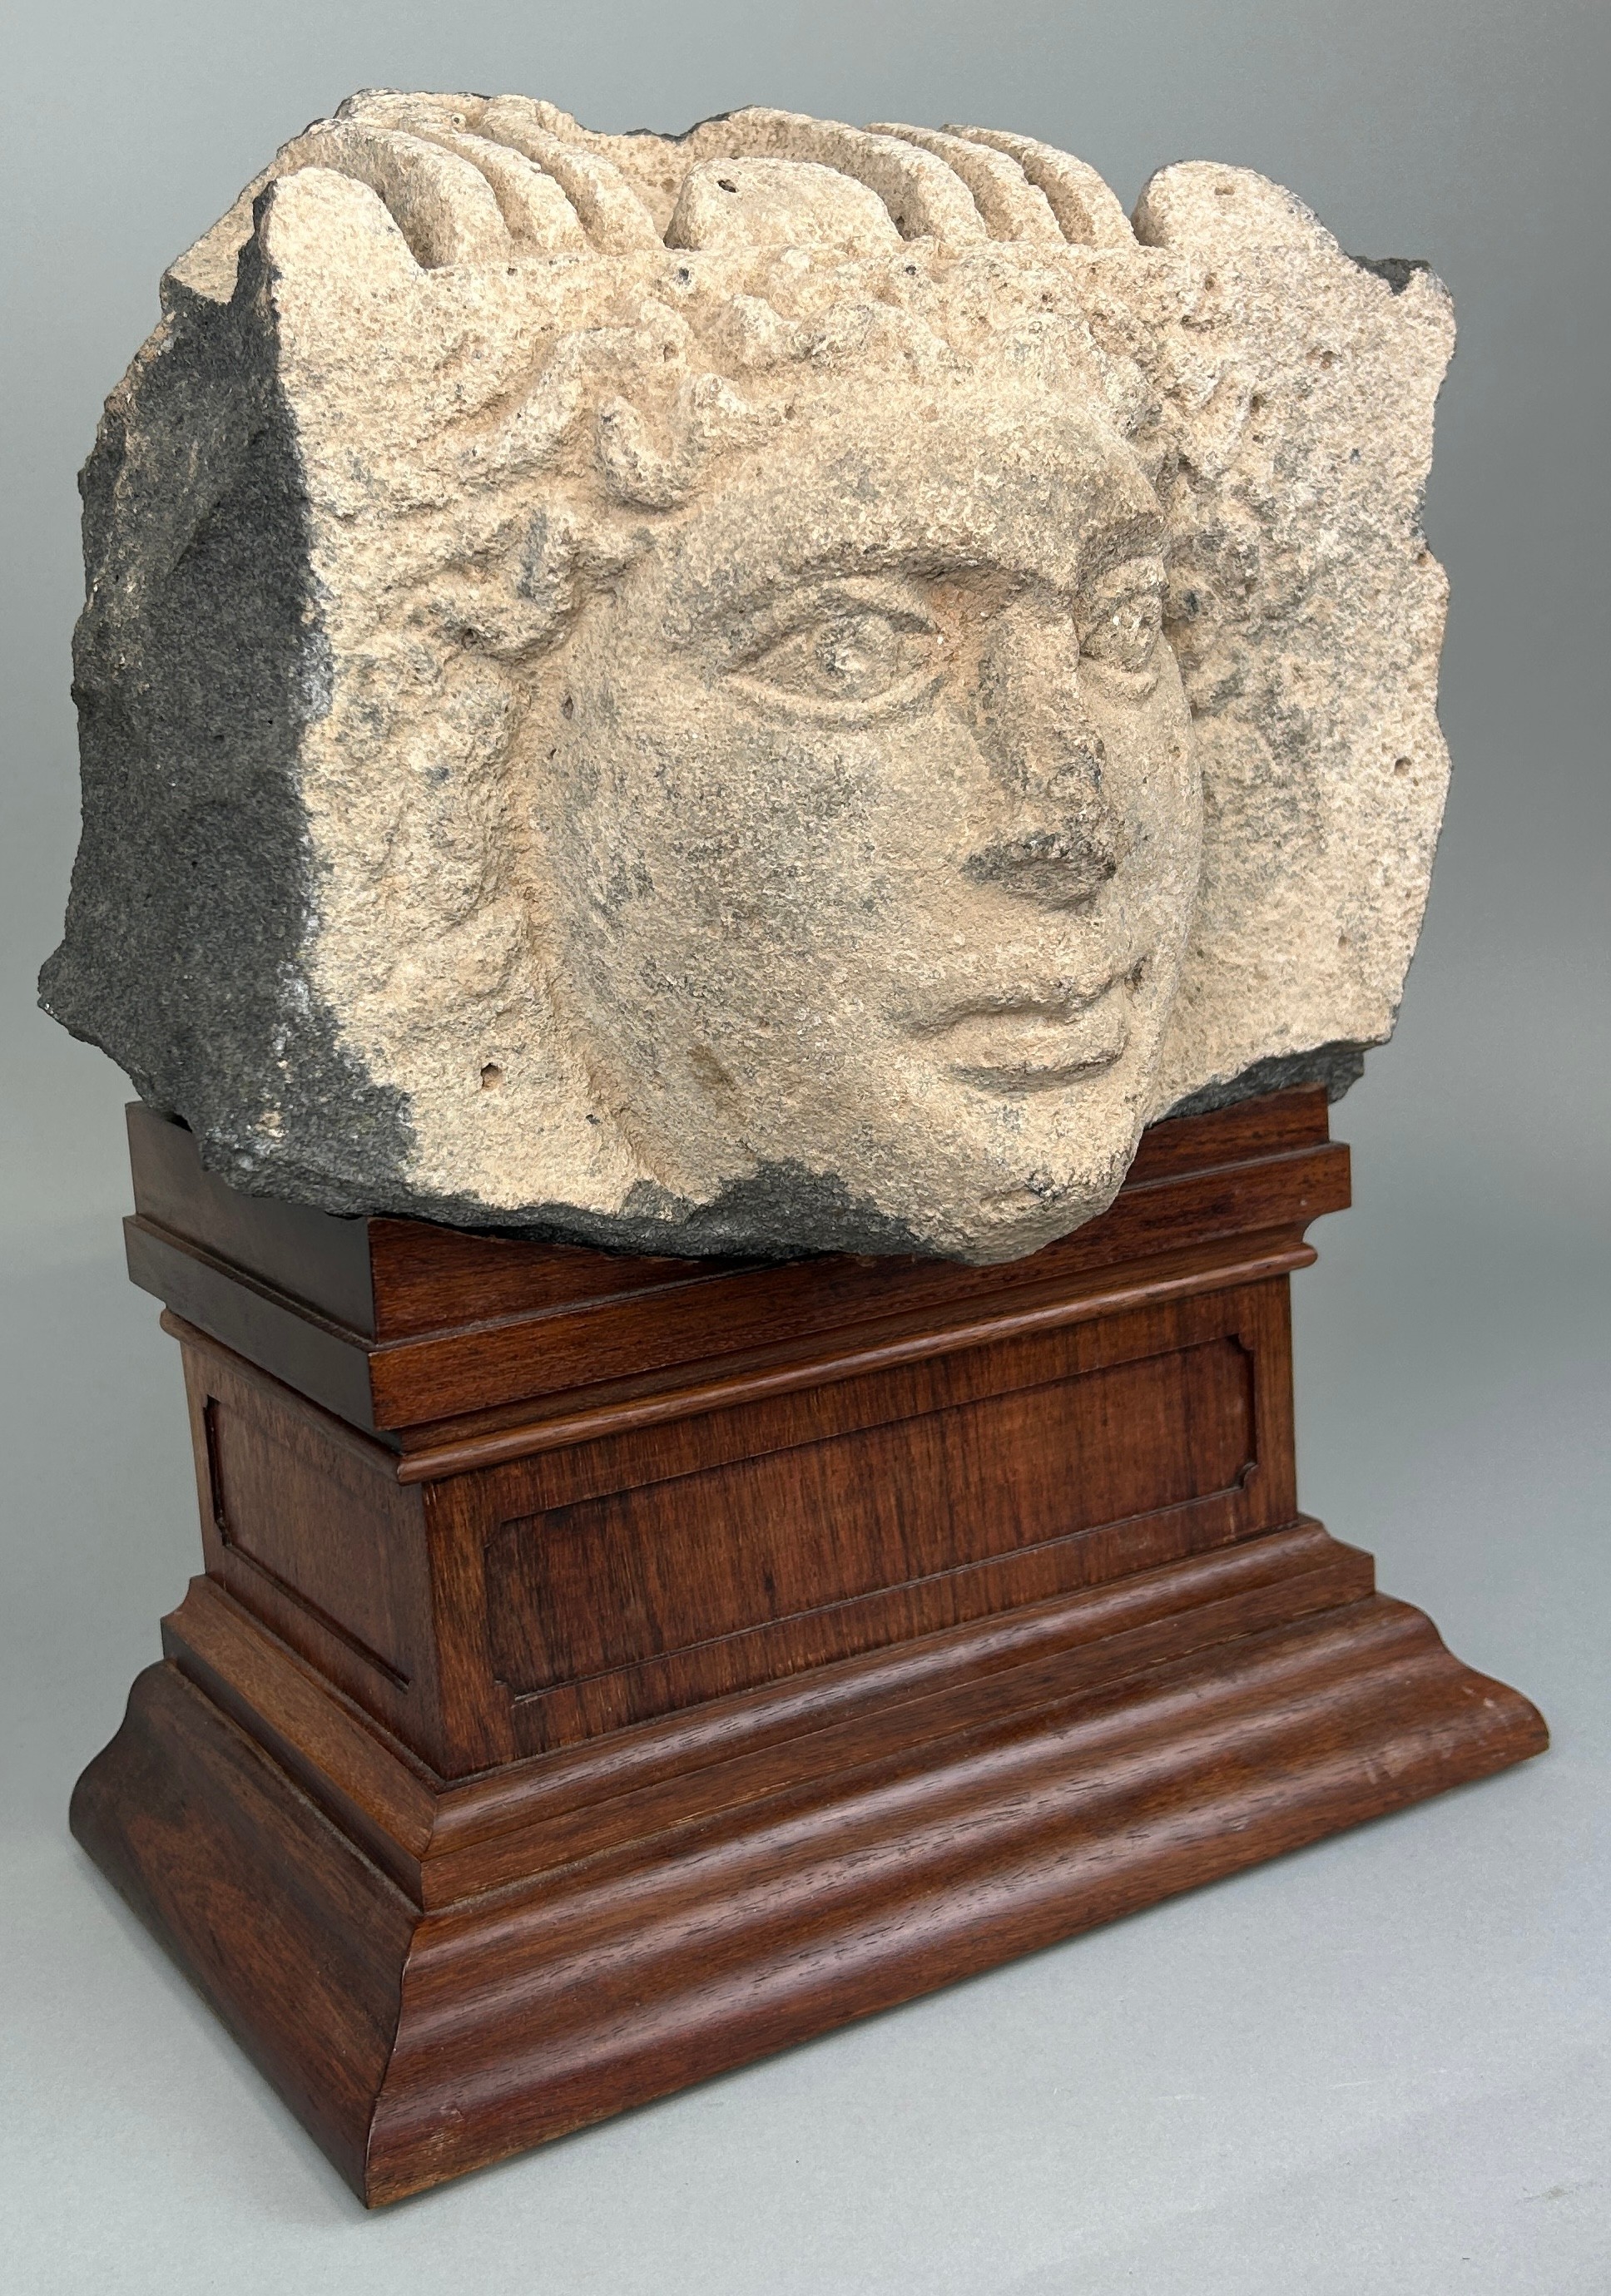 AN EAST ROMAN 'HAURAN' BASALT RELIEF FRAGMENT IN THE FORM OF A HUMAN HEAD CIRCA 2ND CENTURY A.D. The - Image 3 of 9